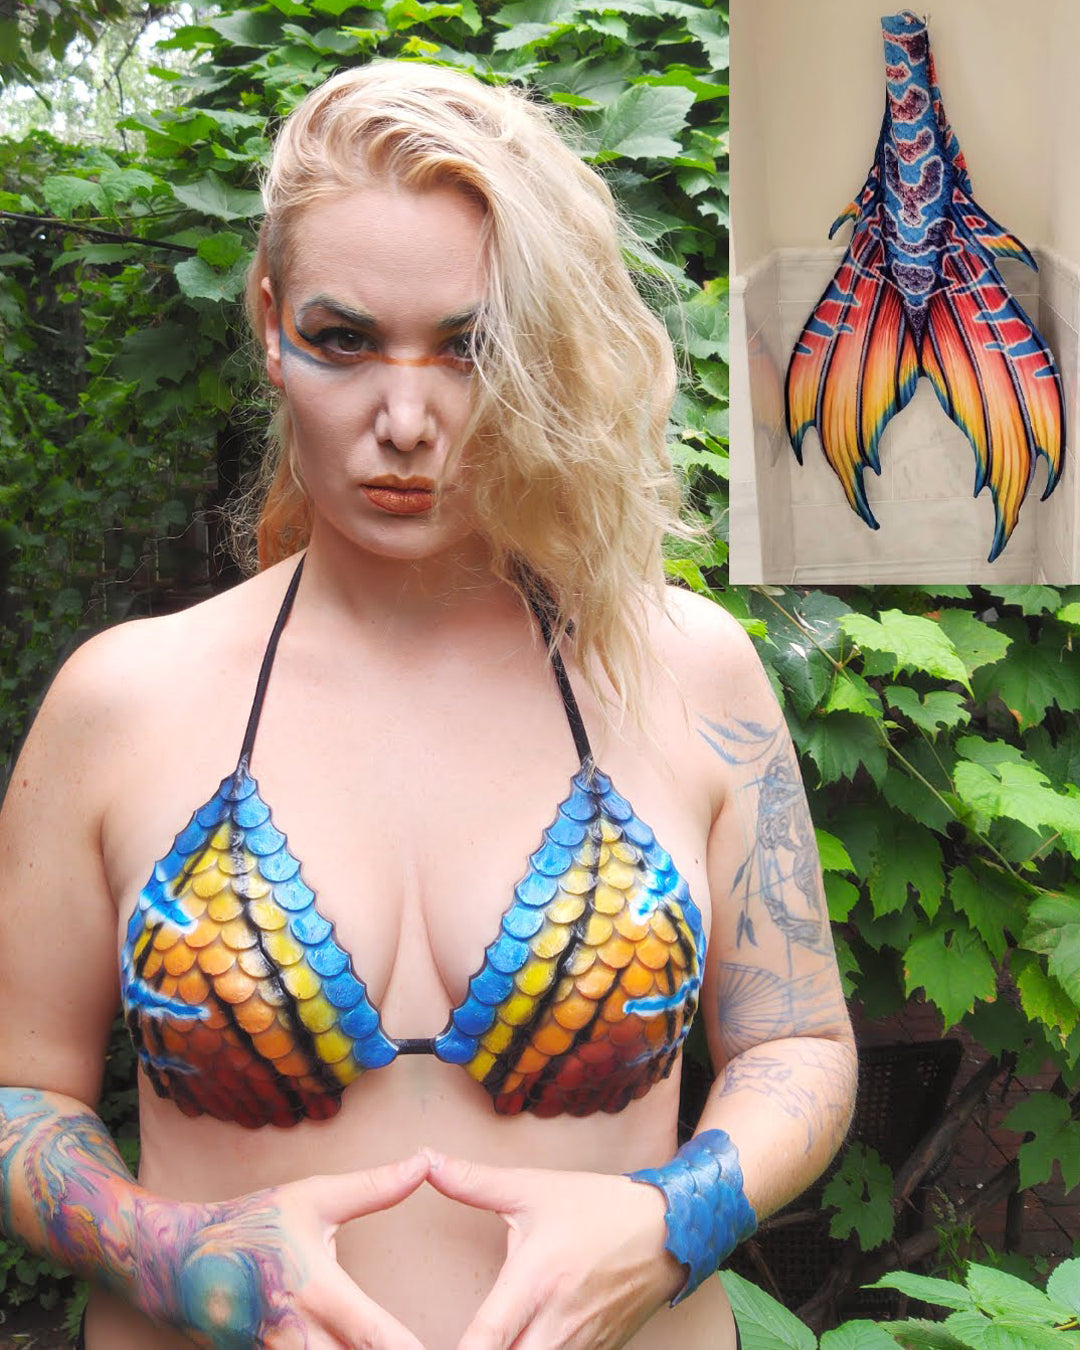 Bikini top in silicone with Patterns on mermaid scales!